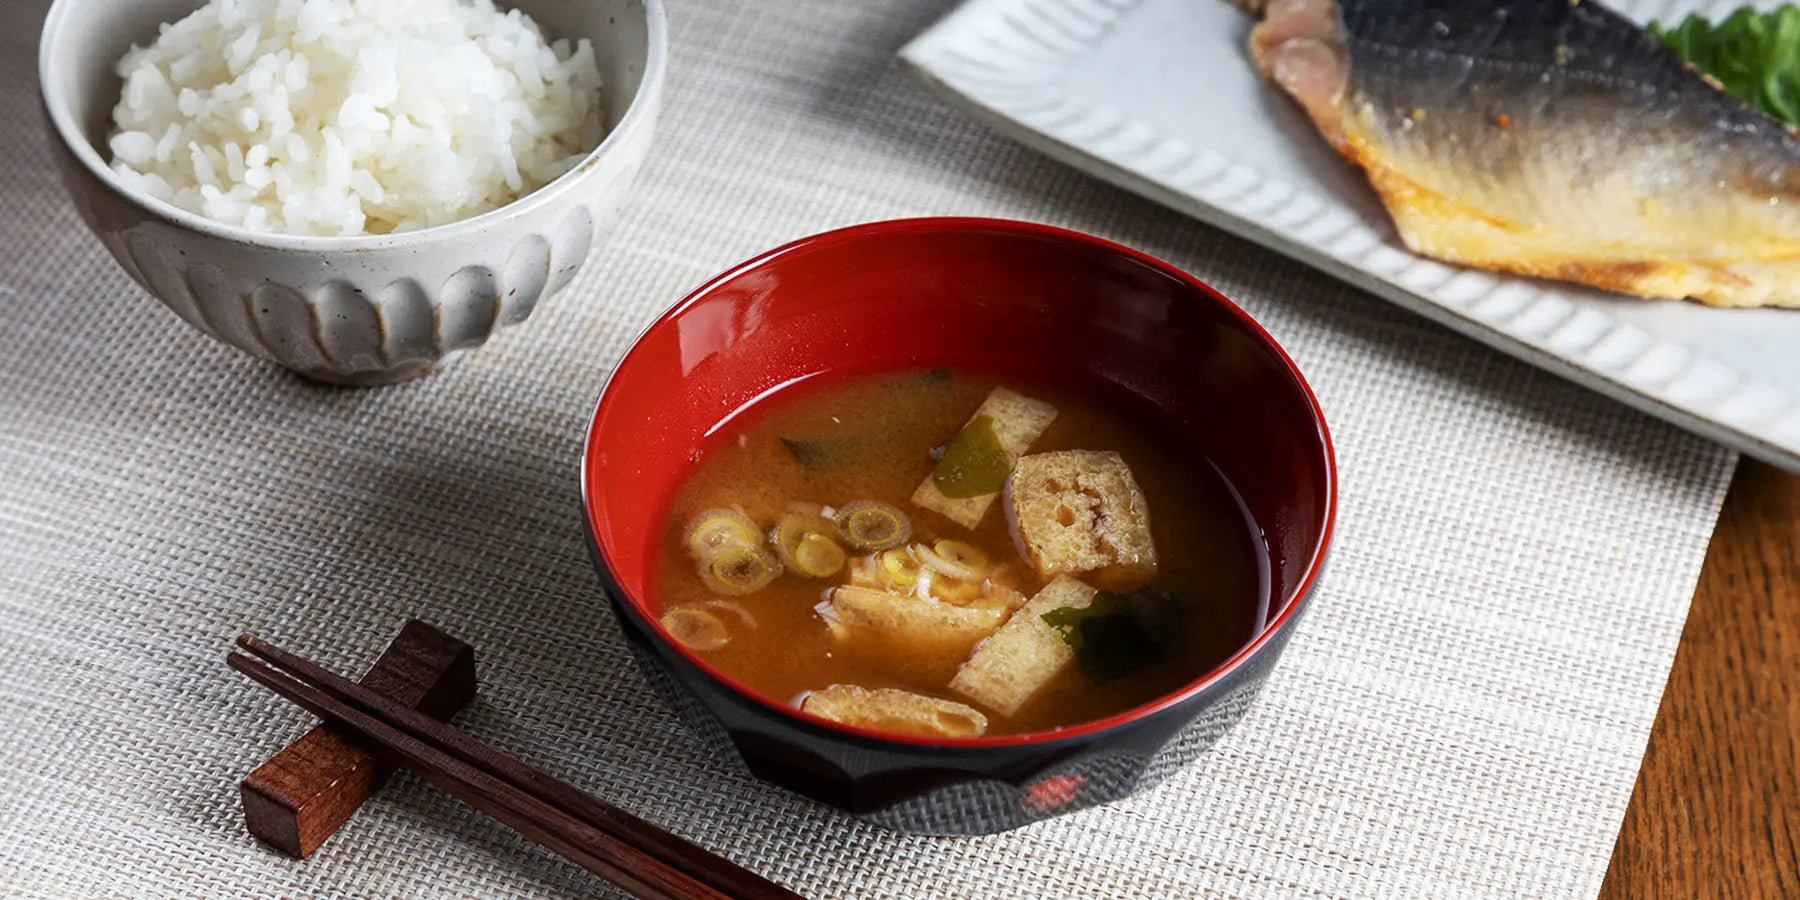 Discover our great selection of Soups & Broths at Globalkitchen Japan.